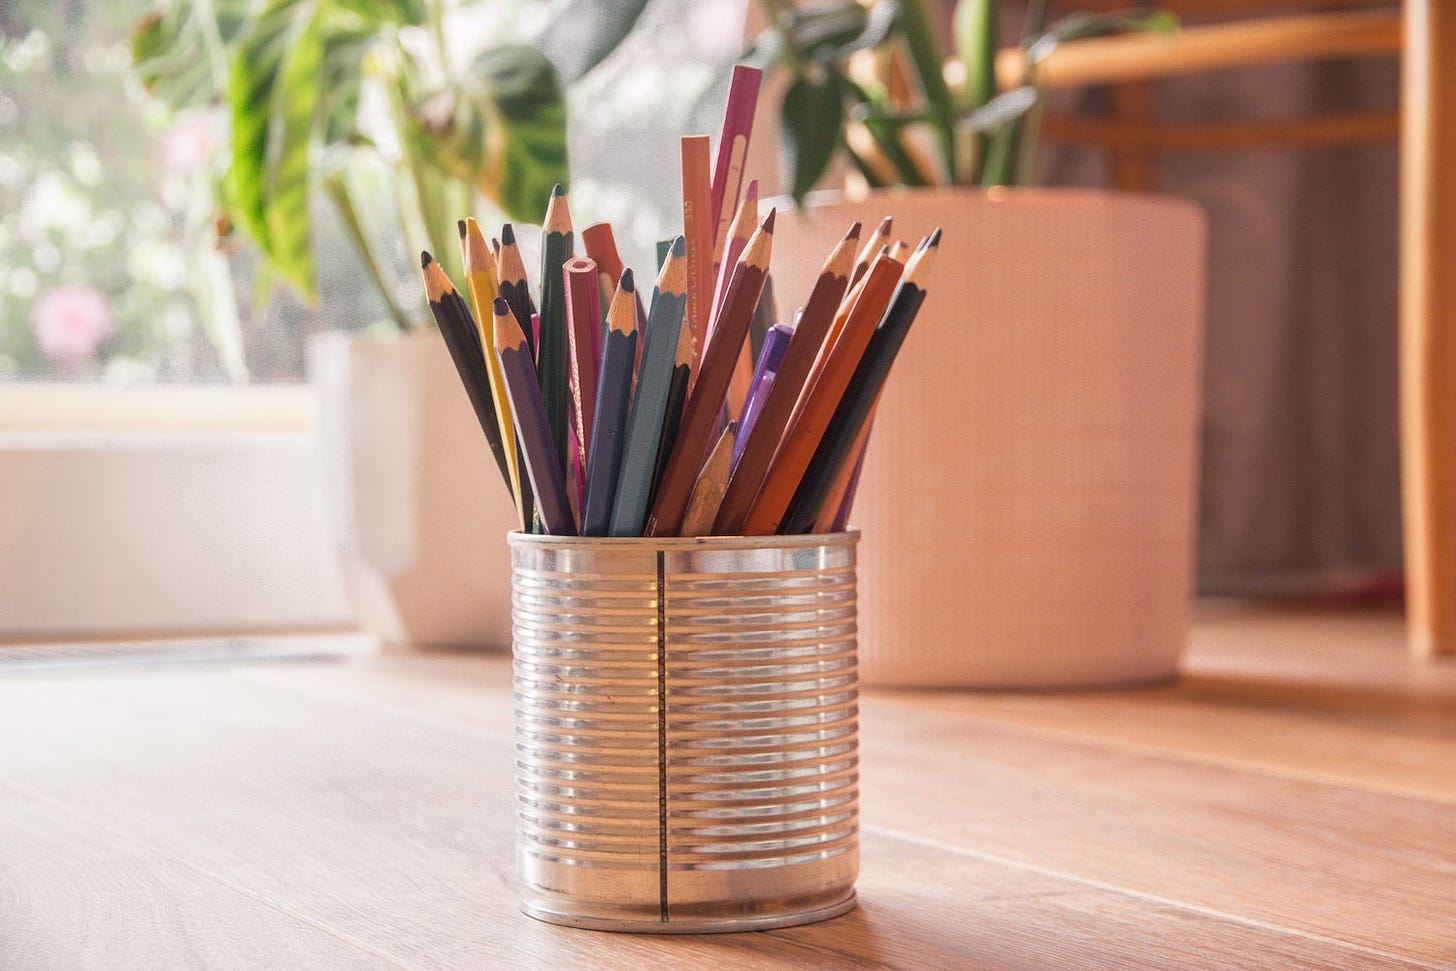 Pot of coloured pencils on a wooden desk by a window in daytime.